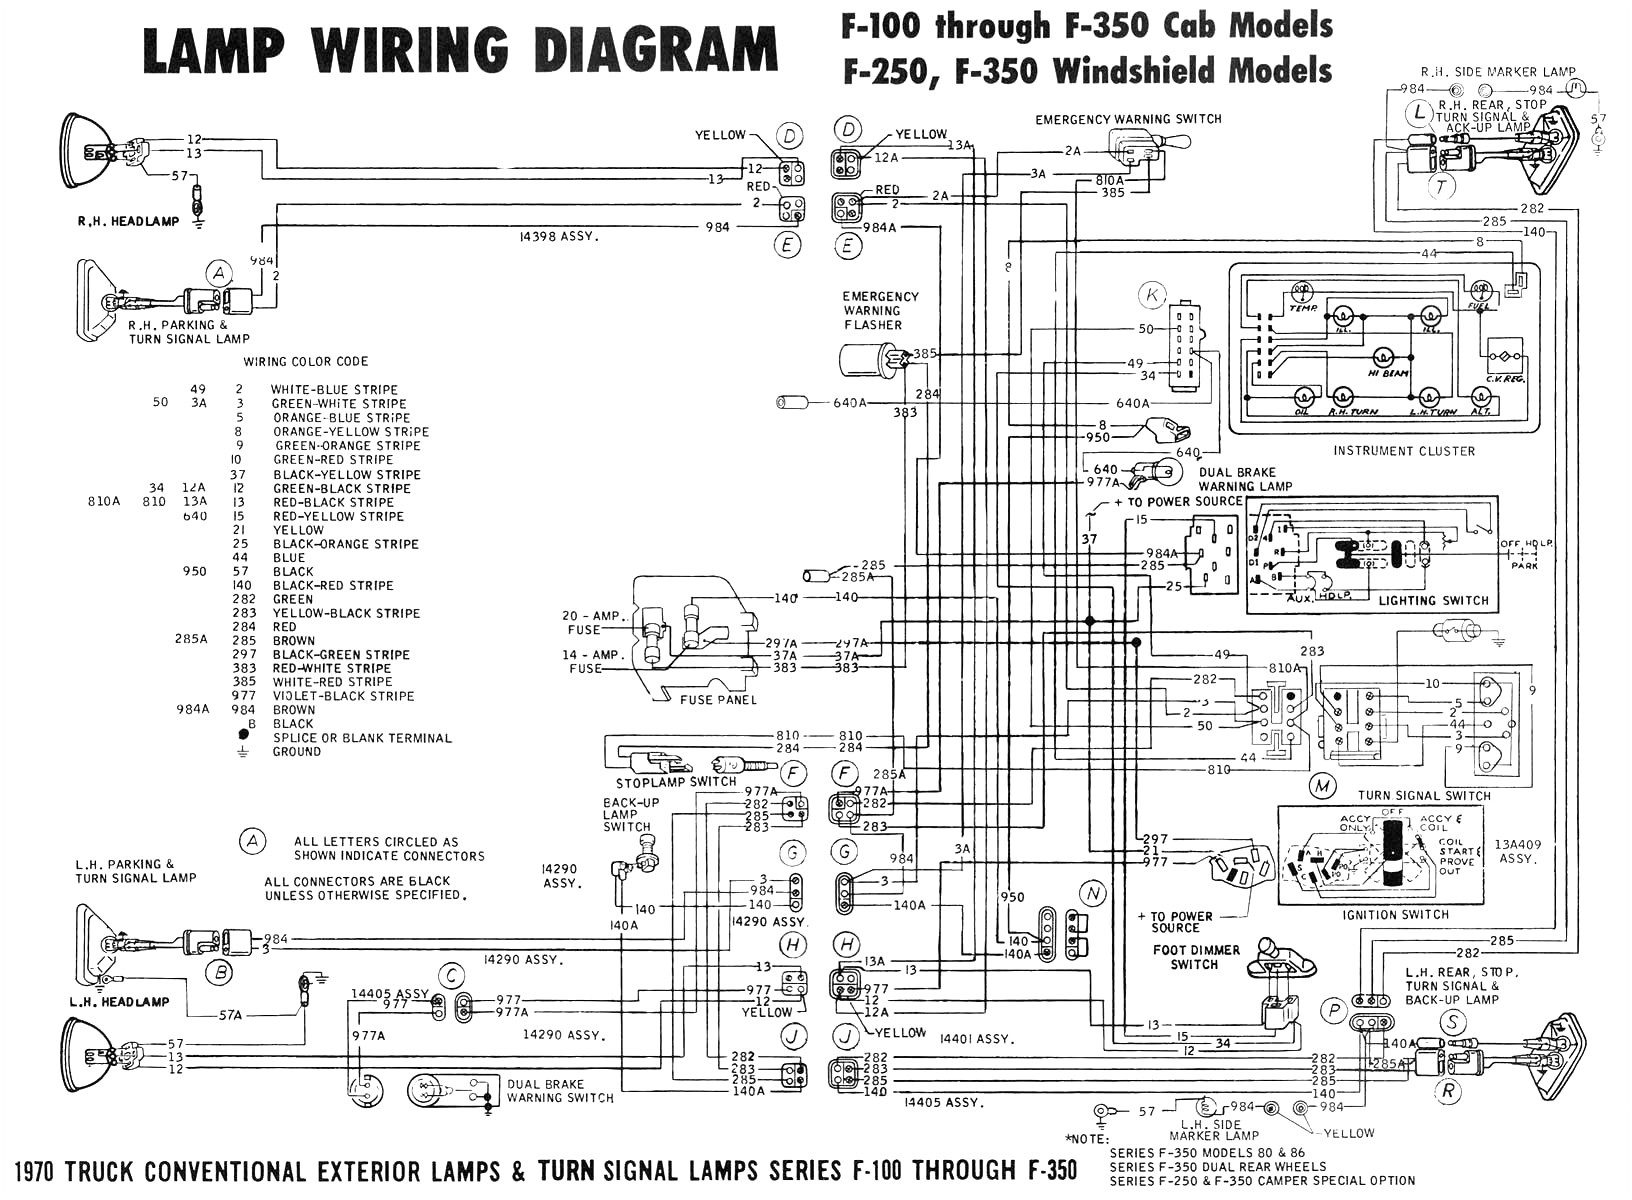 agm ignition switch wiring blog wiring diagram agm headlight switch wiring use wiring diagram agm ignition